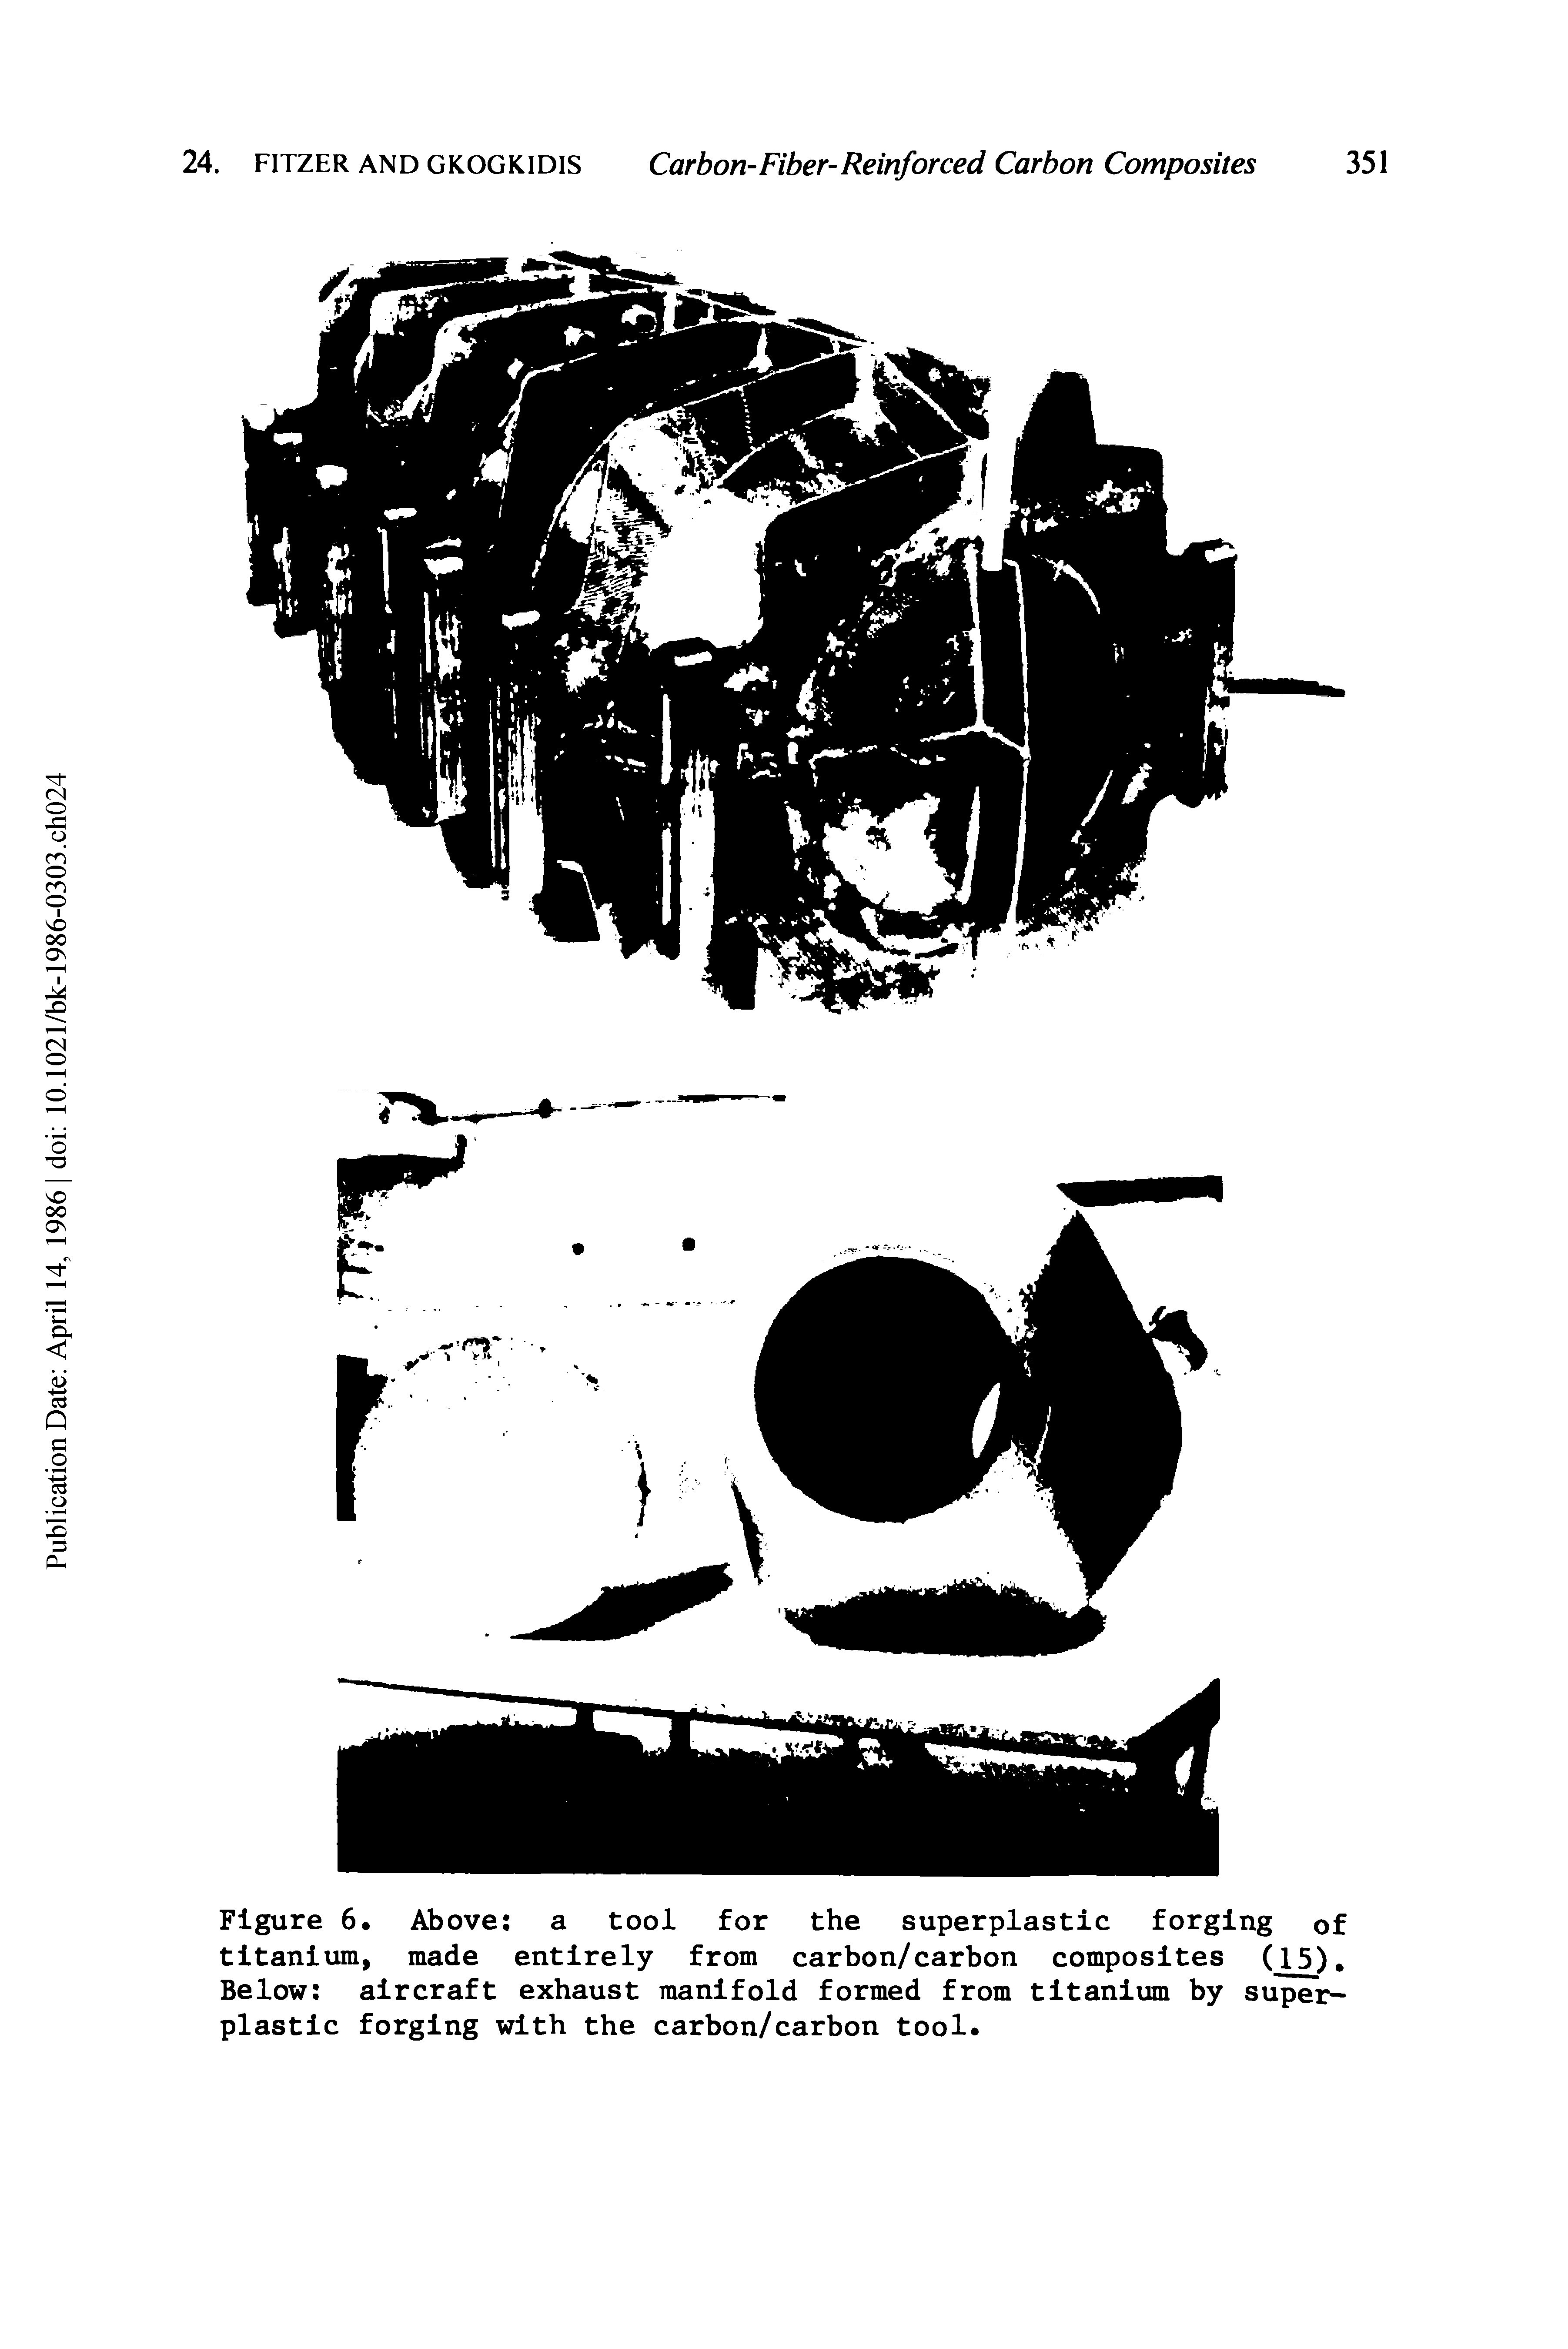 Figure 6. Above a tool for the superplastic forging of titanium, made entirely from carbon/carbon composites (15) Below aircraft exhaust manifold formed from titanium by superplastic forging with the carbon/carbon tool.